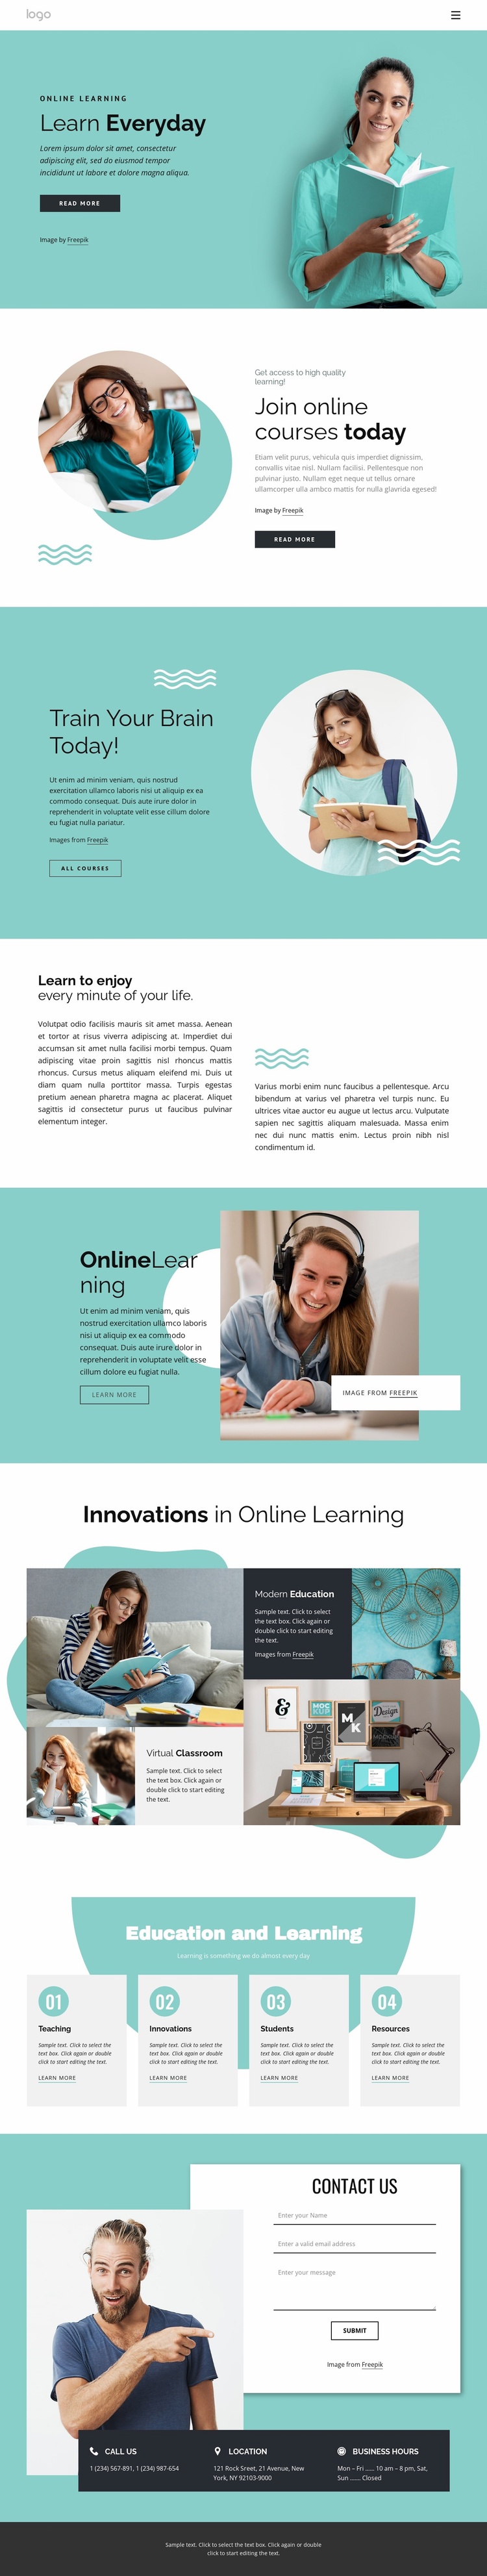 Learning is a lifelong process Website Template